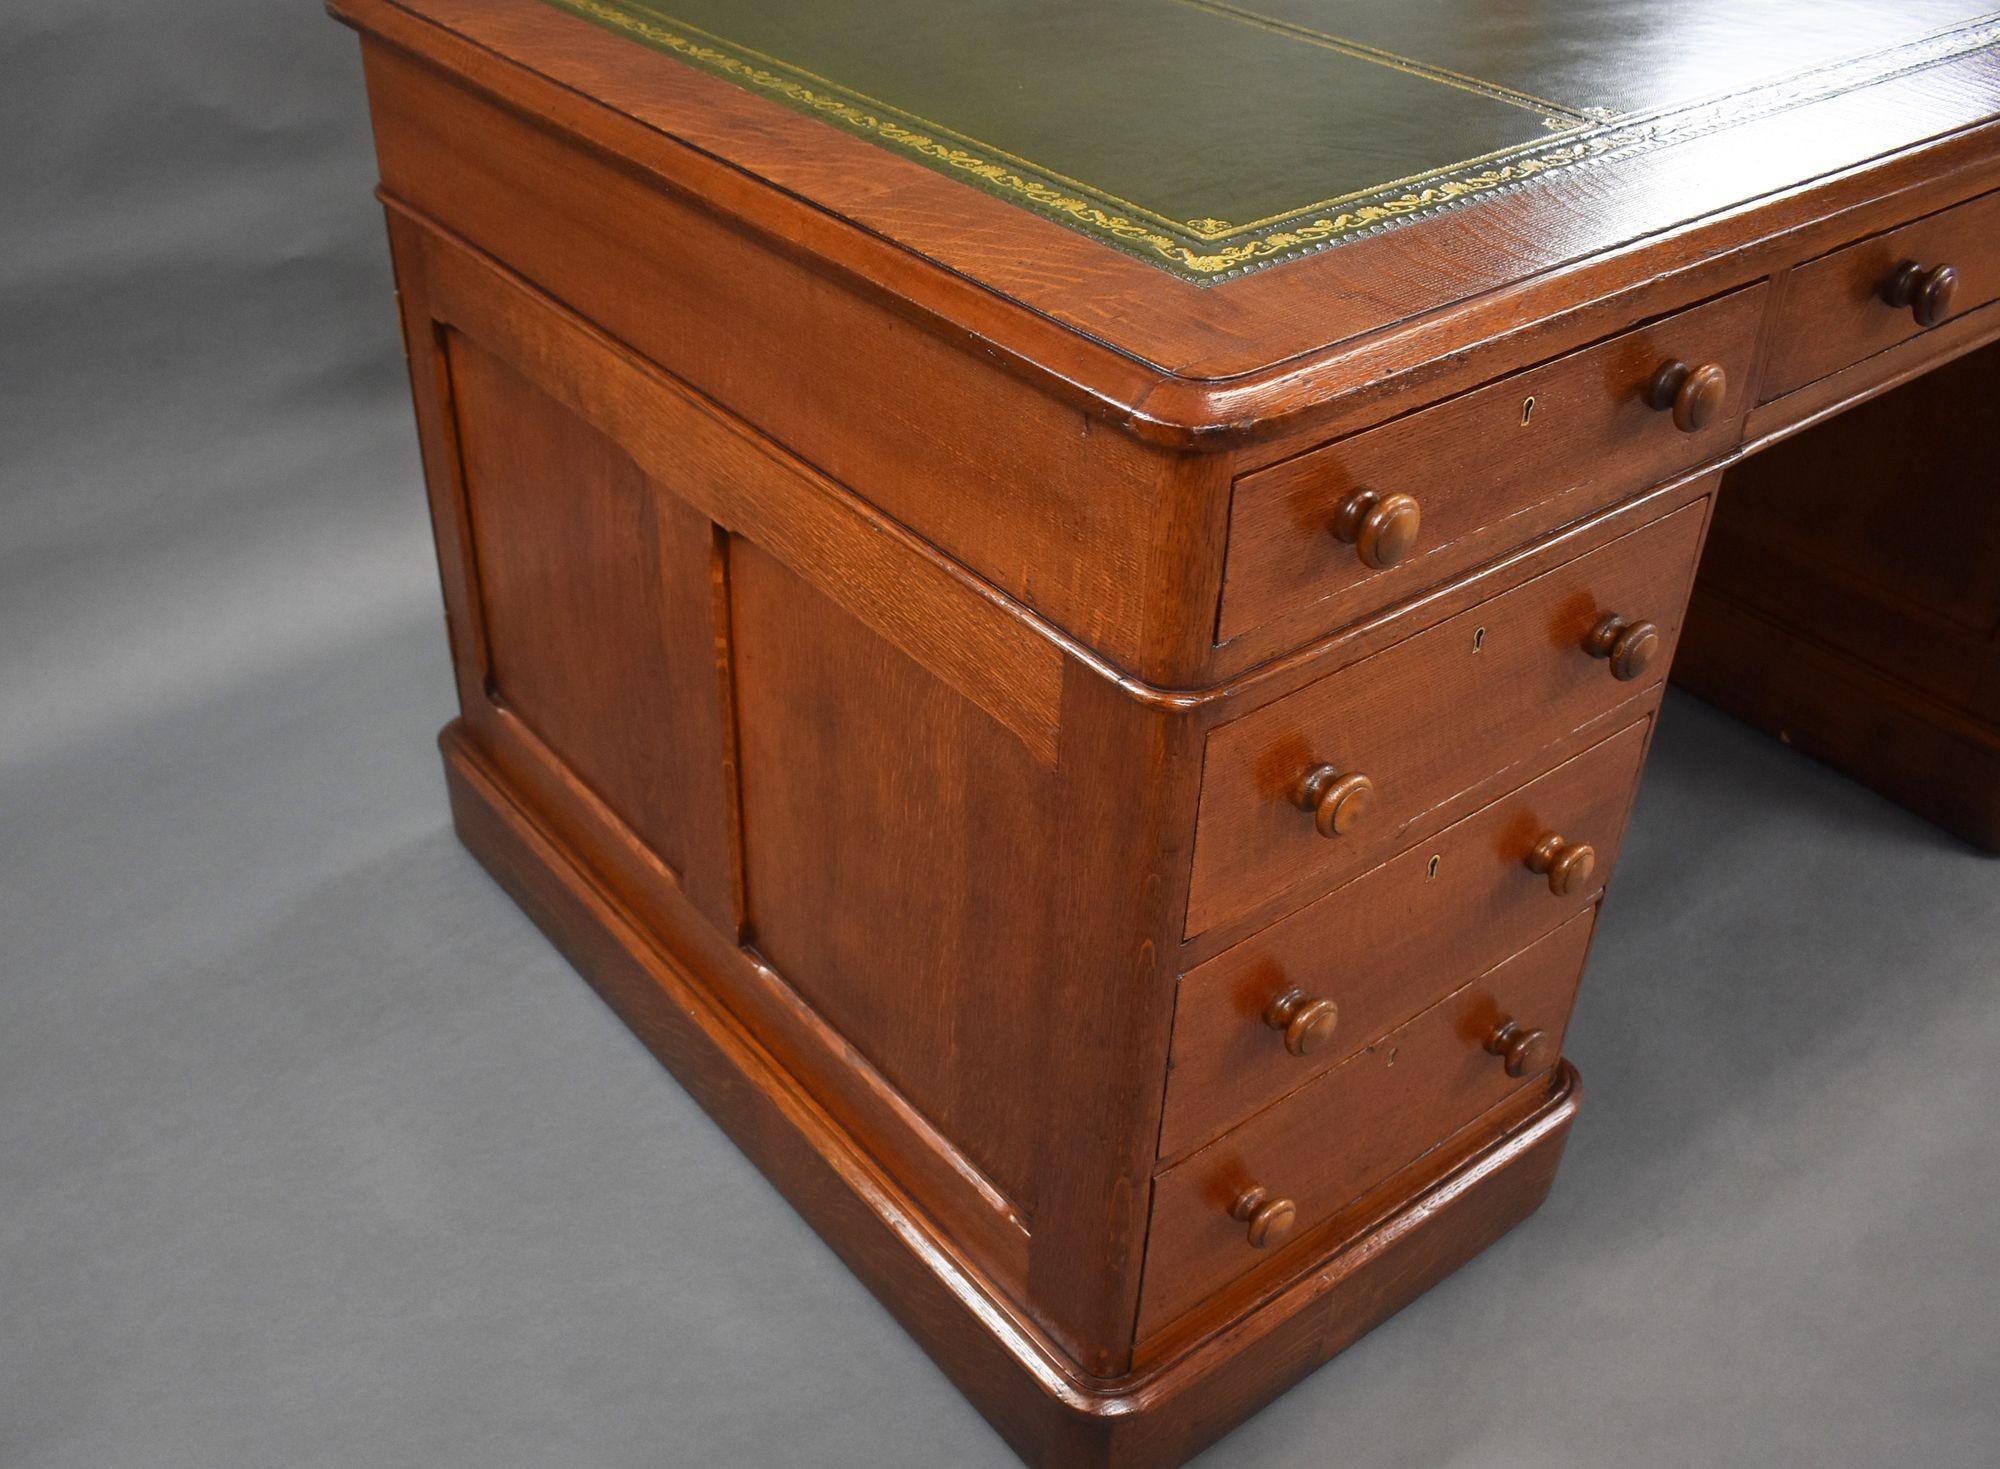 For sale is a good quality Victorian oak partners desk, having a quality green leather skiver writing surface, decorated with gold tooling, above three drawers to the front, and three drawers on the opposing side. Each pedestal has a further three